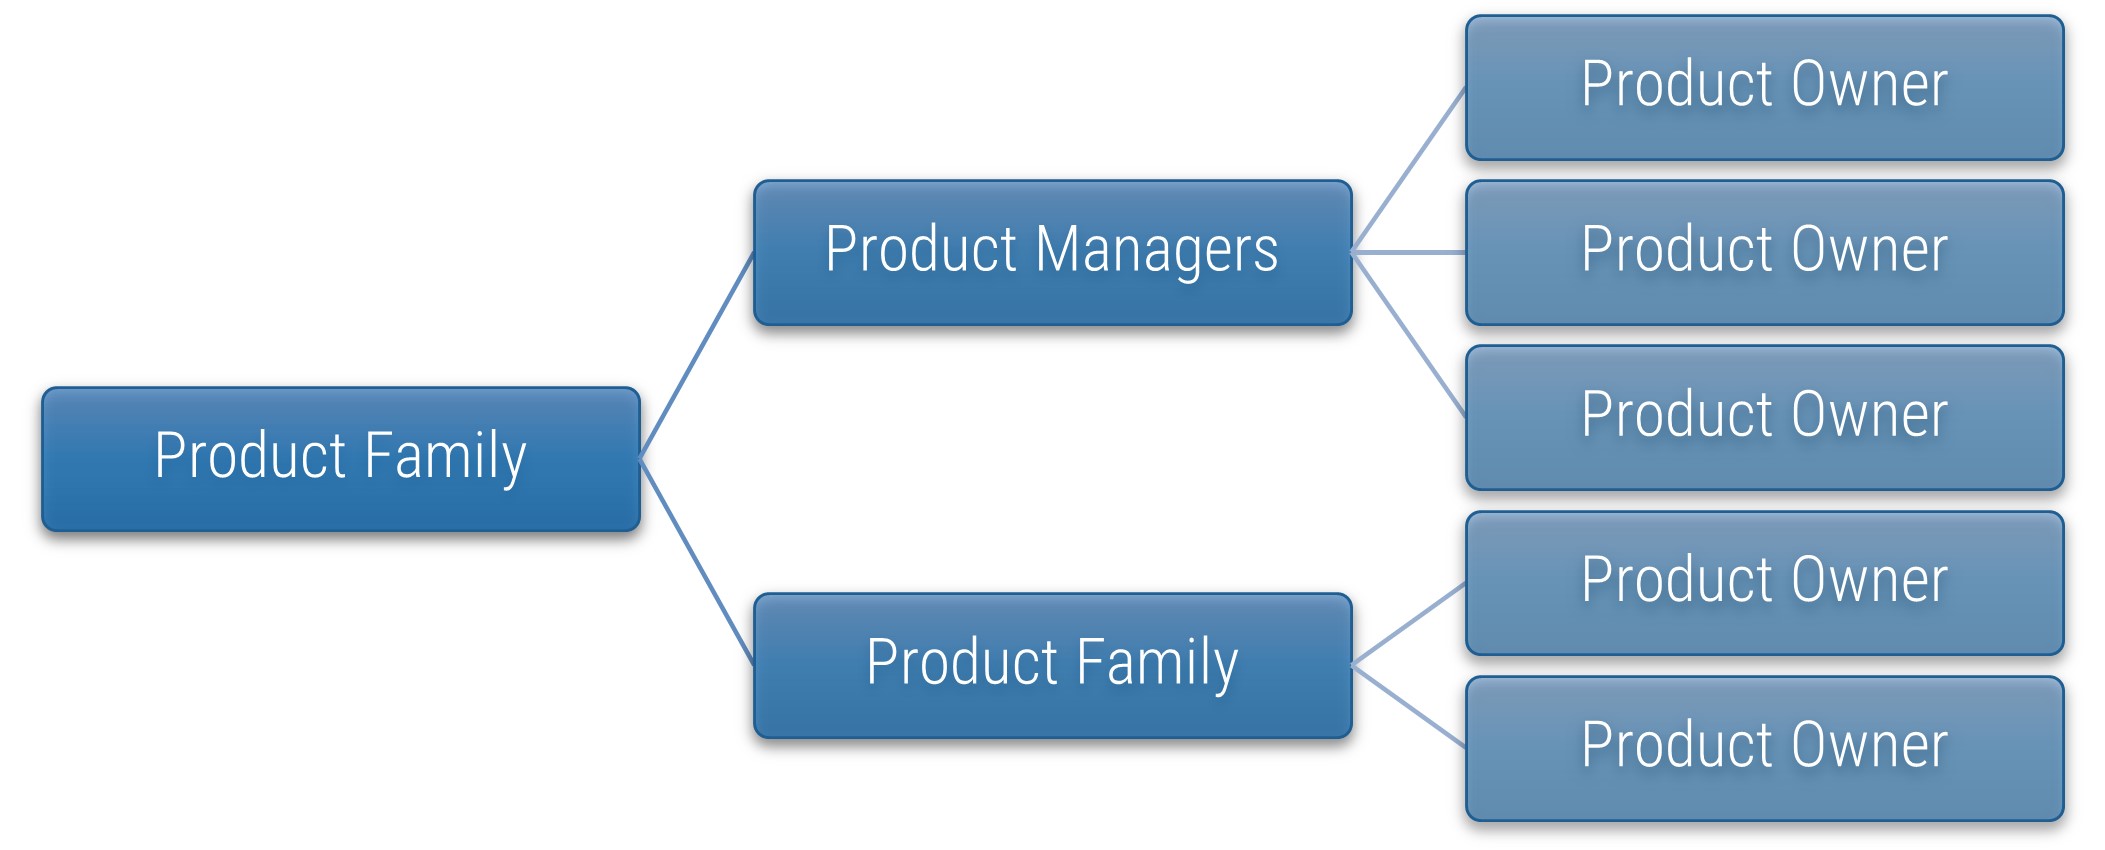 A flowchart is shown to demonstrate the relations between product family and the delivery streams.